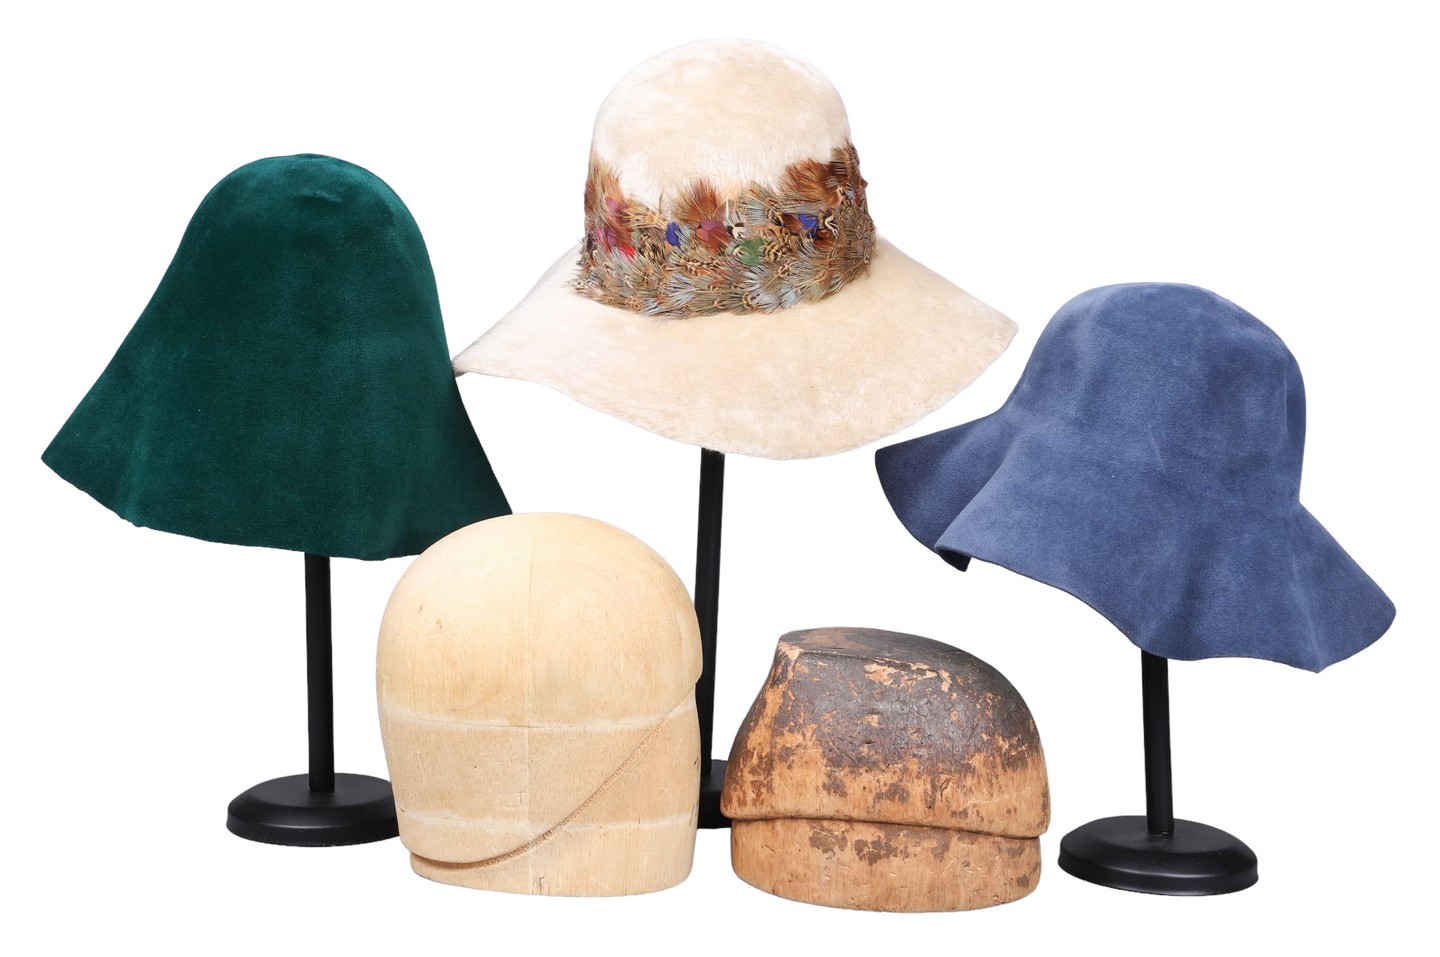  3 1970 s hats to include 2  27a69b